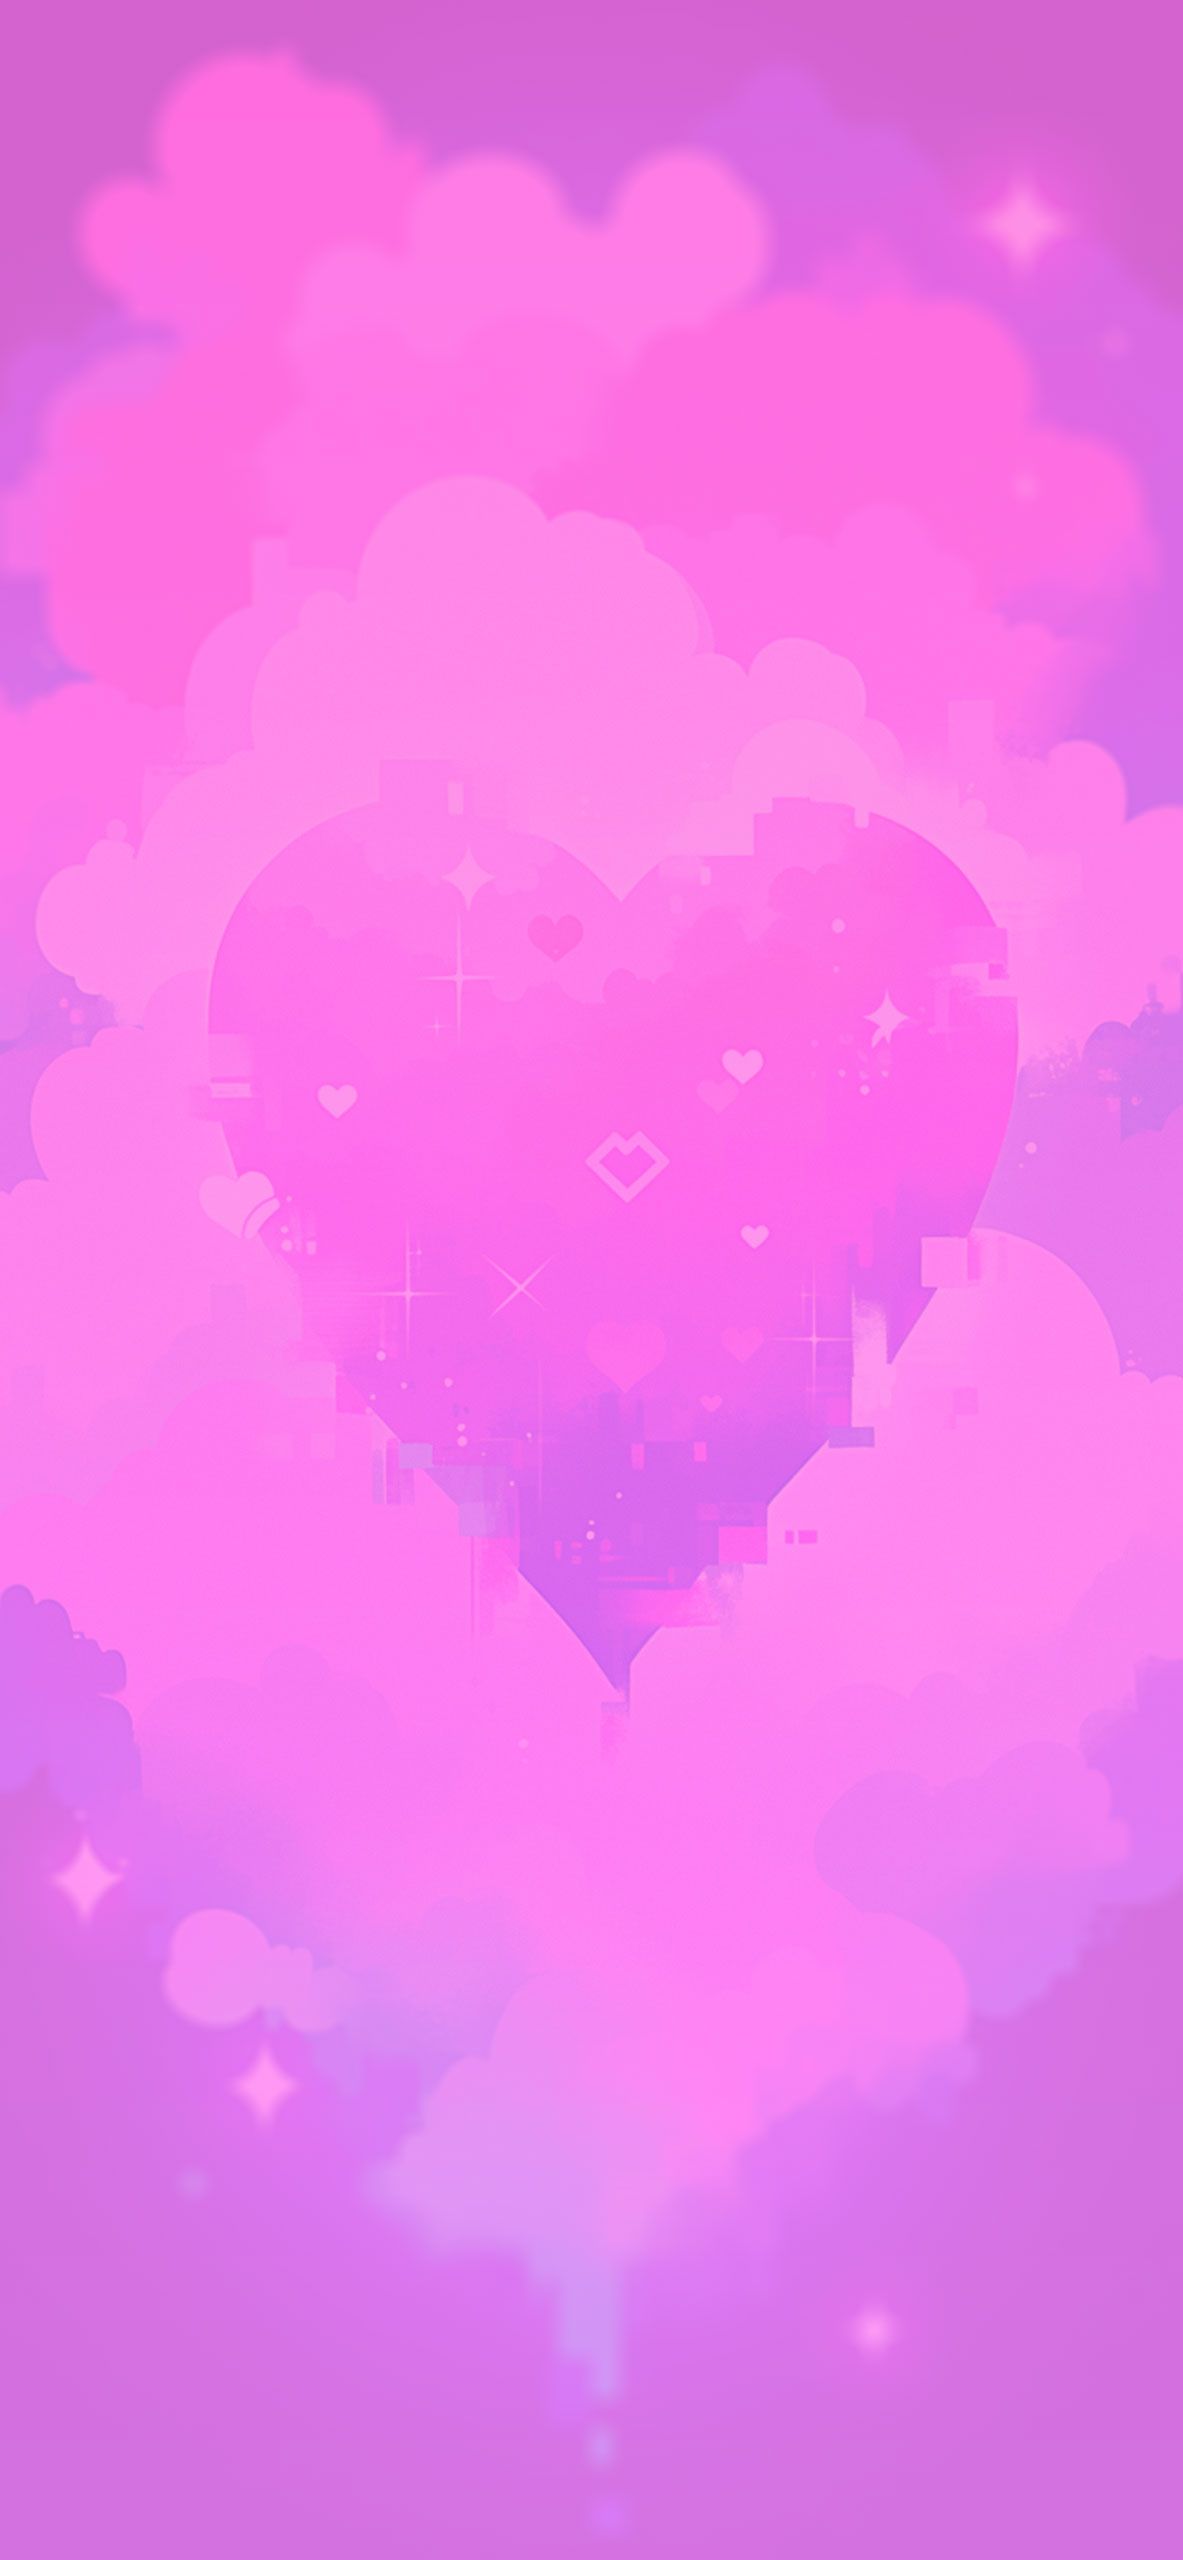 A pink heart on a pink background - Pink heart